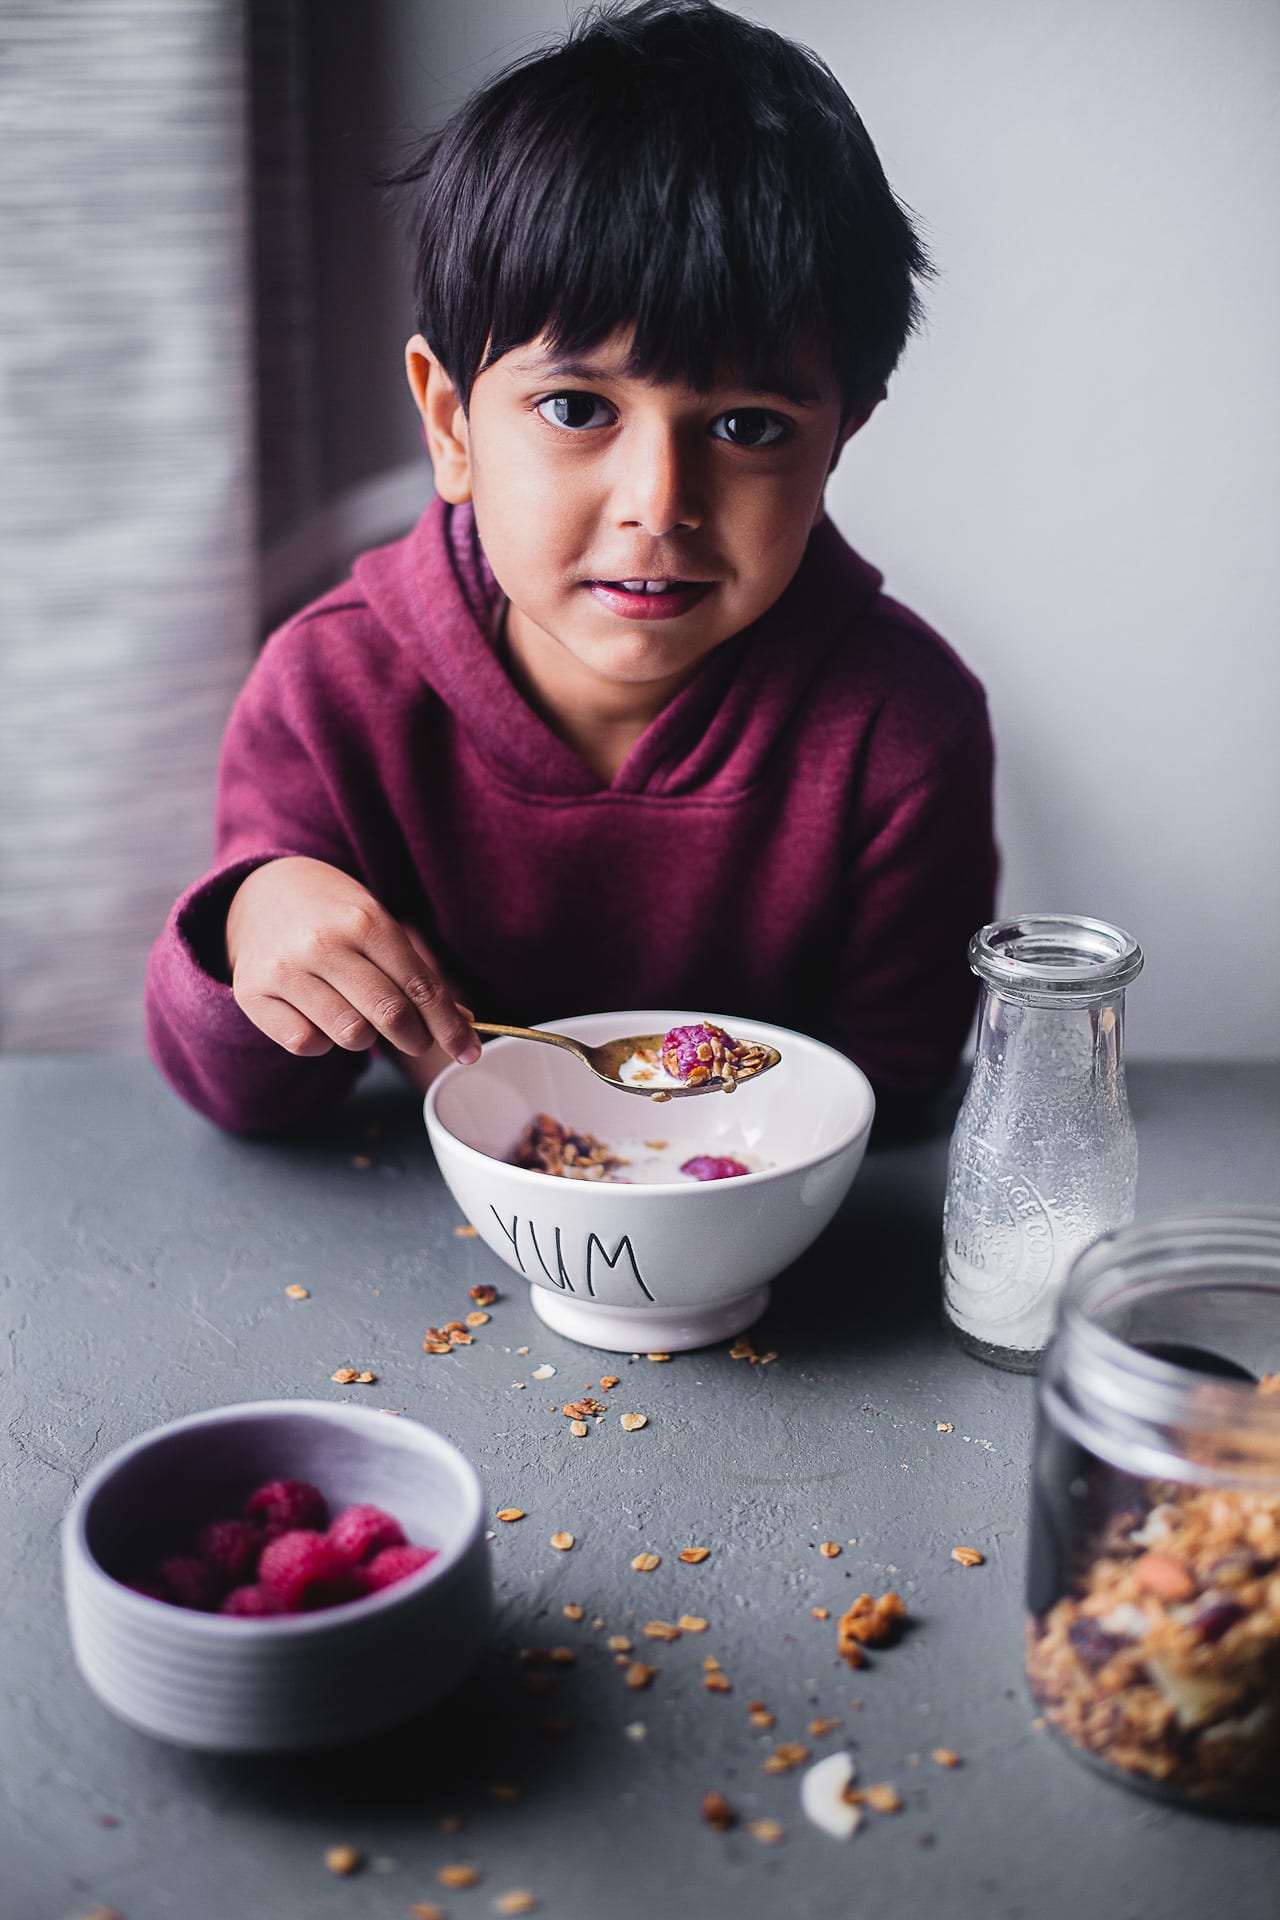 my sweet baby | Playful Cooking #granola #simple #breakfast #foodphotography